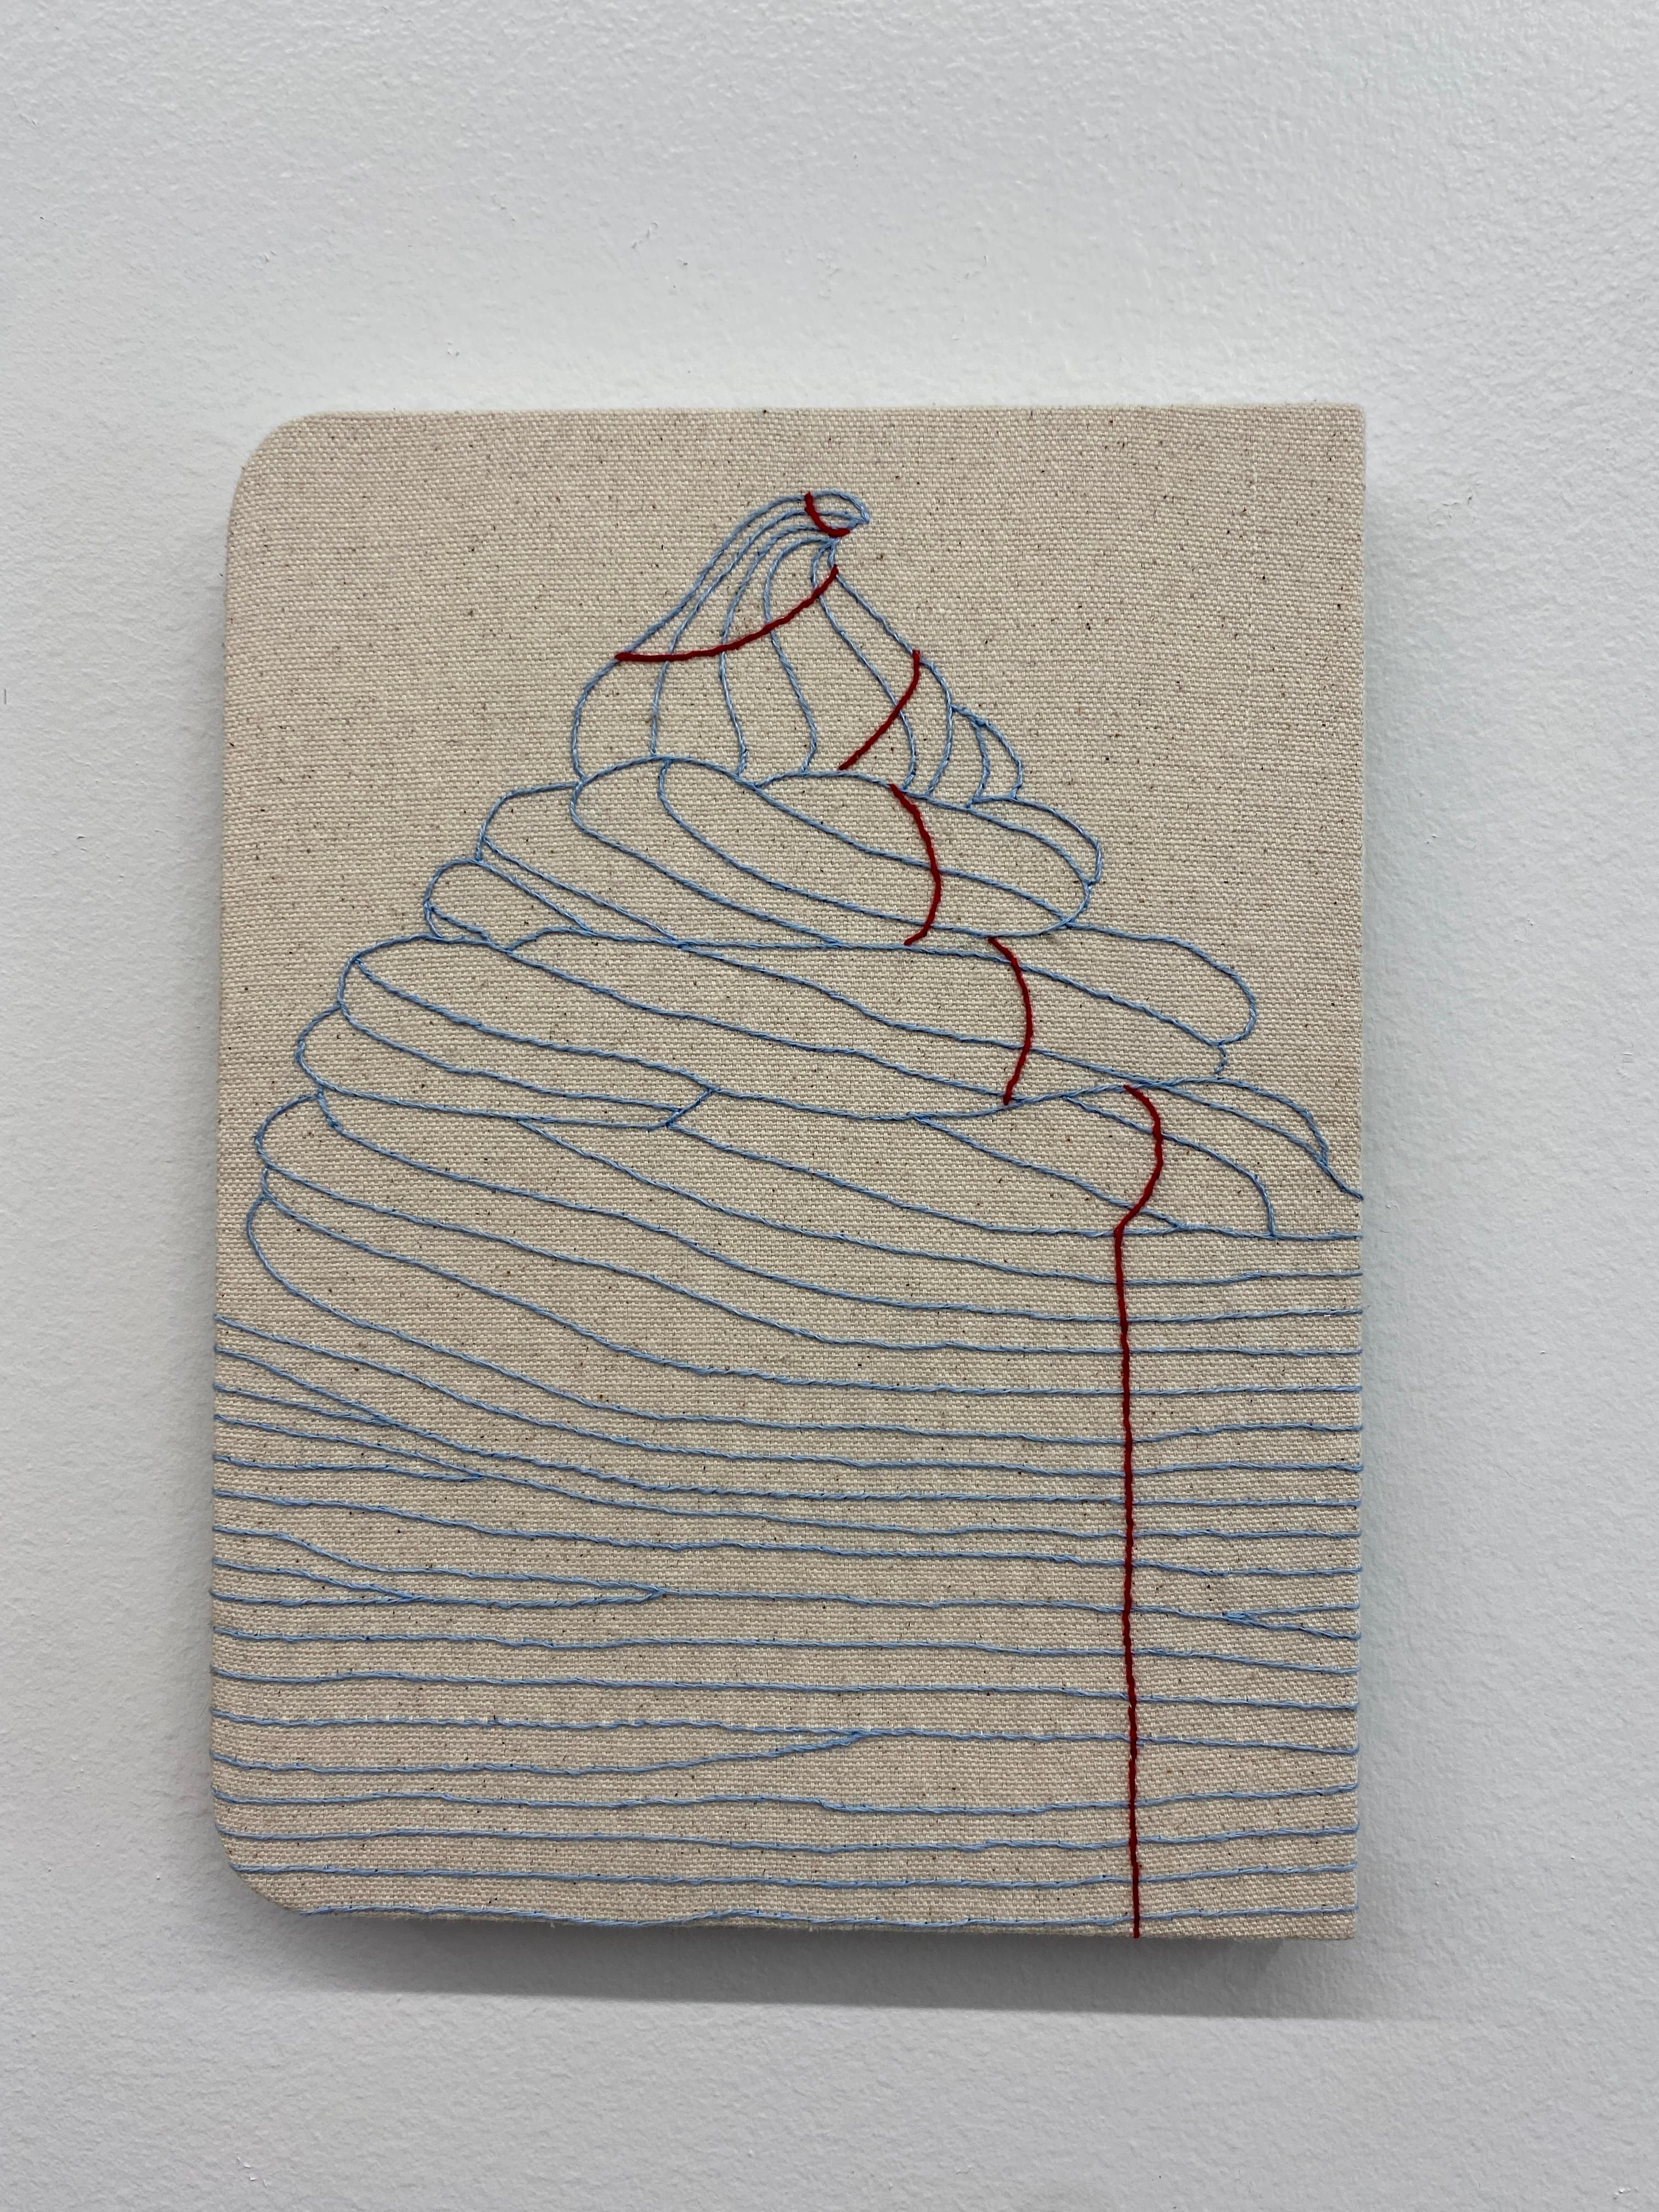 Notes for String Theory 040722, Contemporary Embroidery on Canvas, Hand Stitched - Sculpture by Candace Hicks